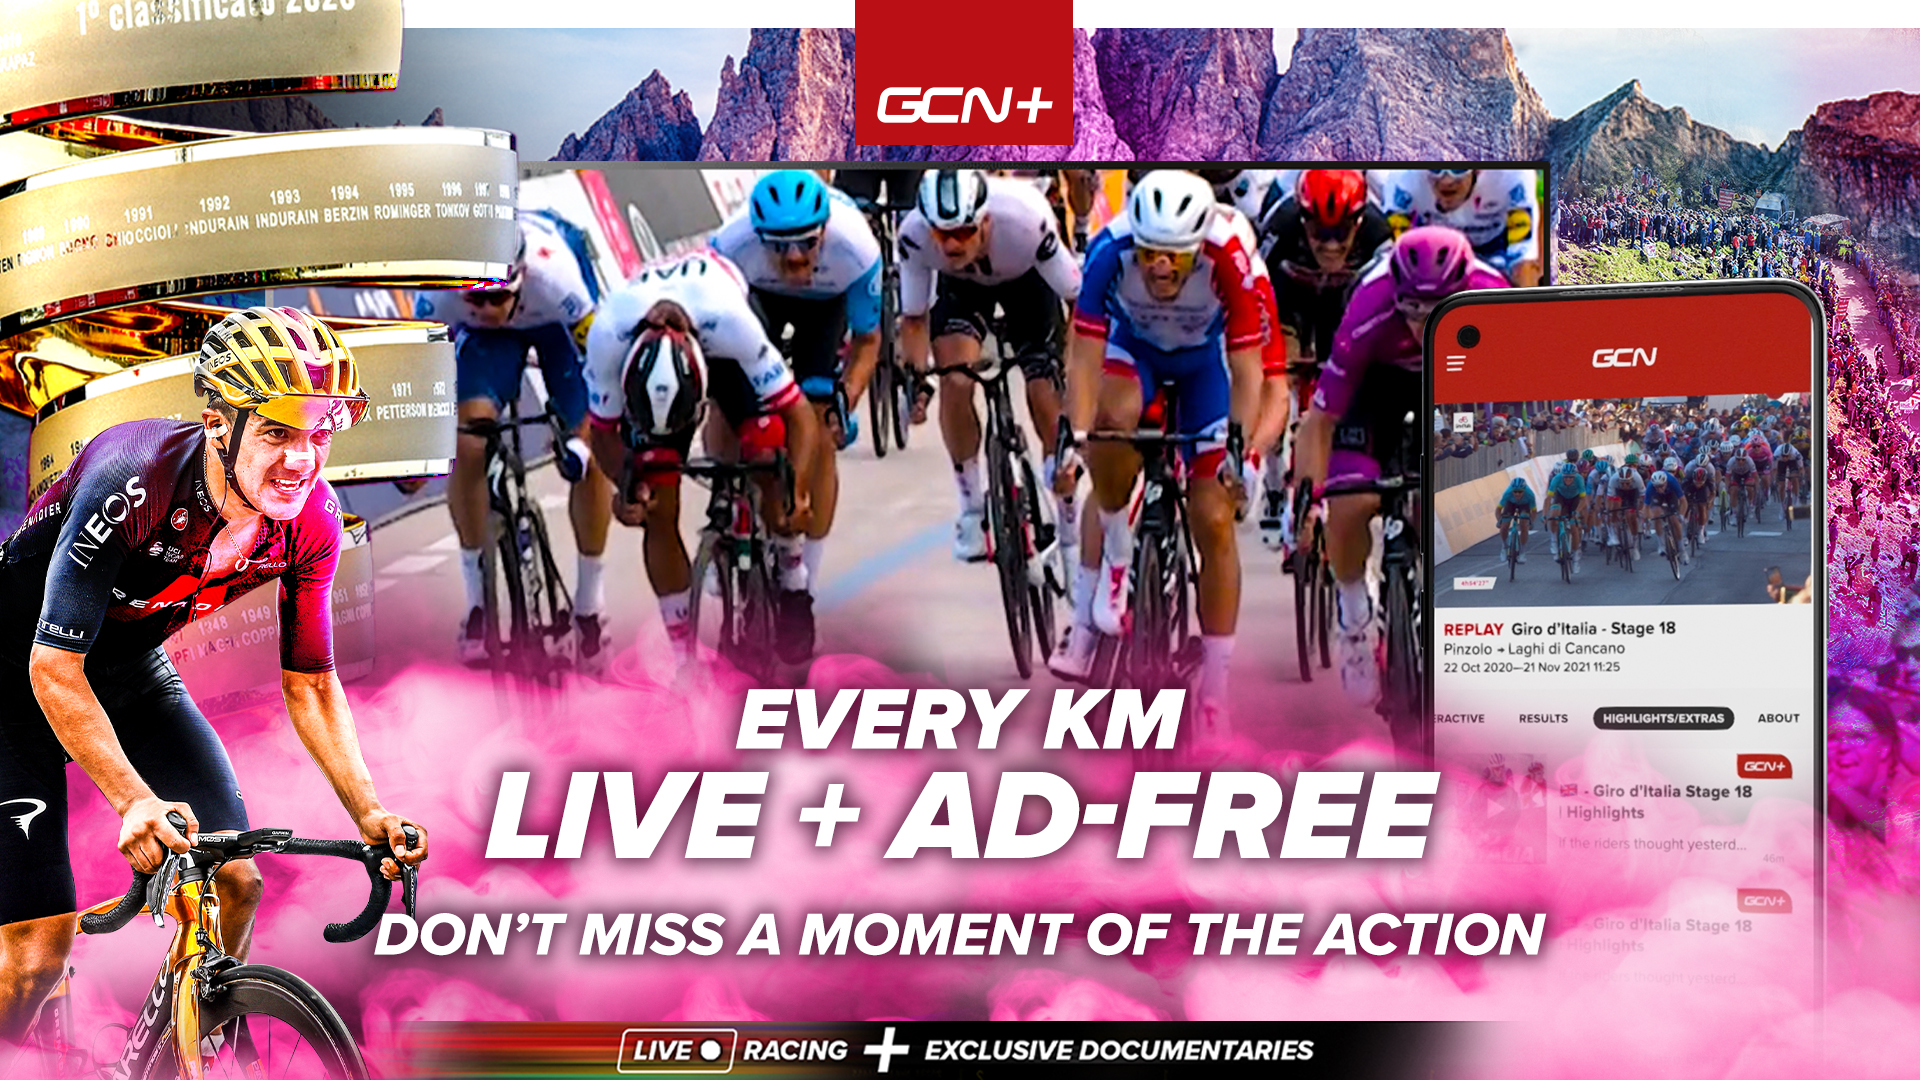 Dont want to miss a minute of the Giro dItalia? Watch live racing on demand with GCN+ road.cc